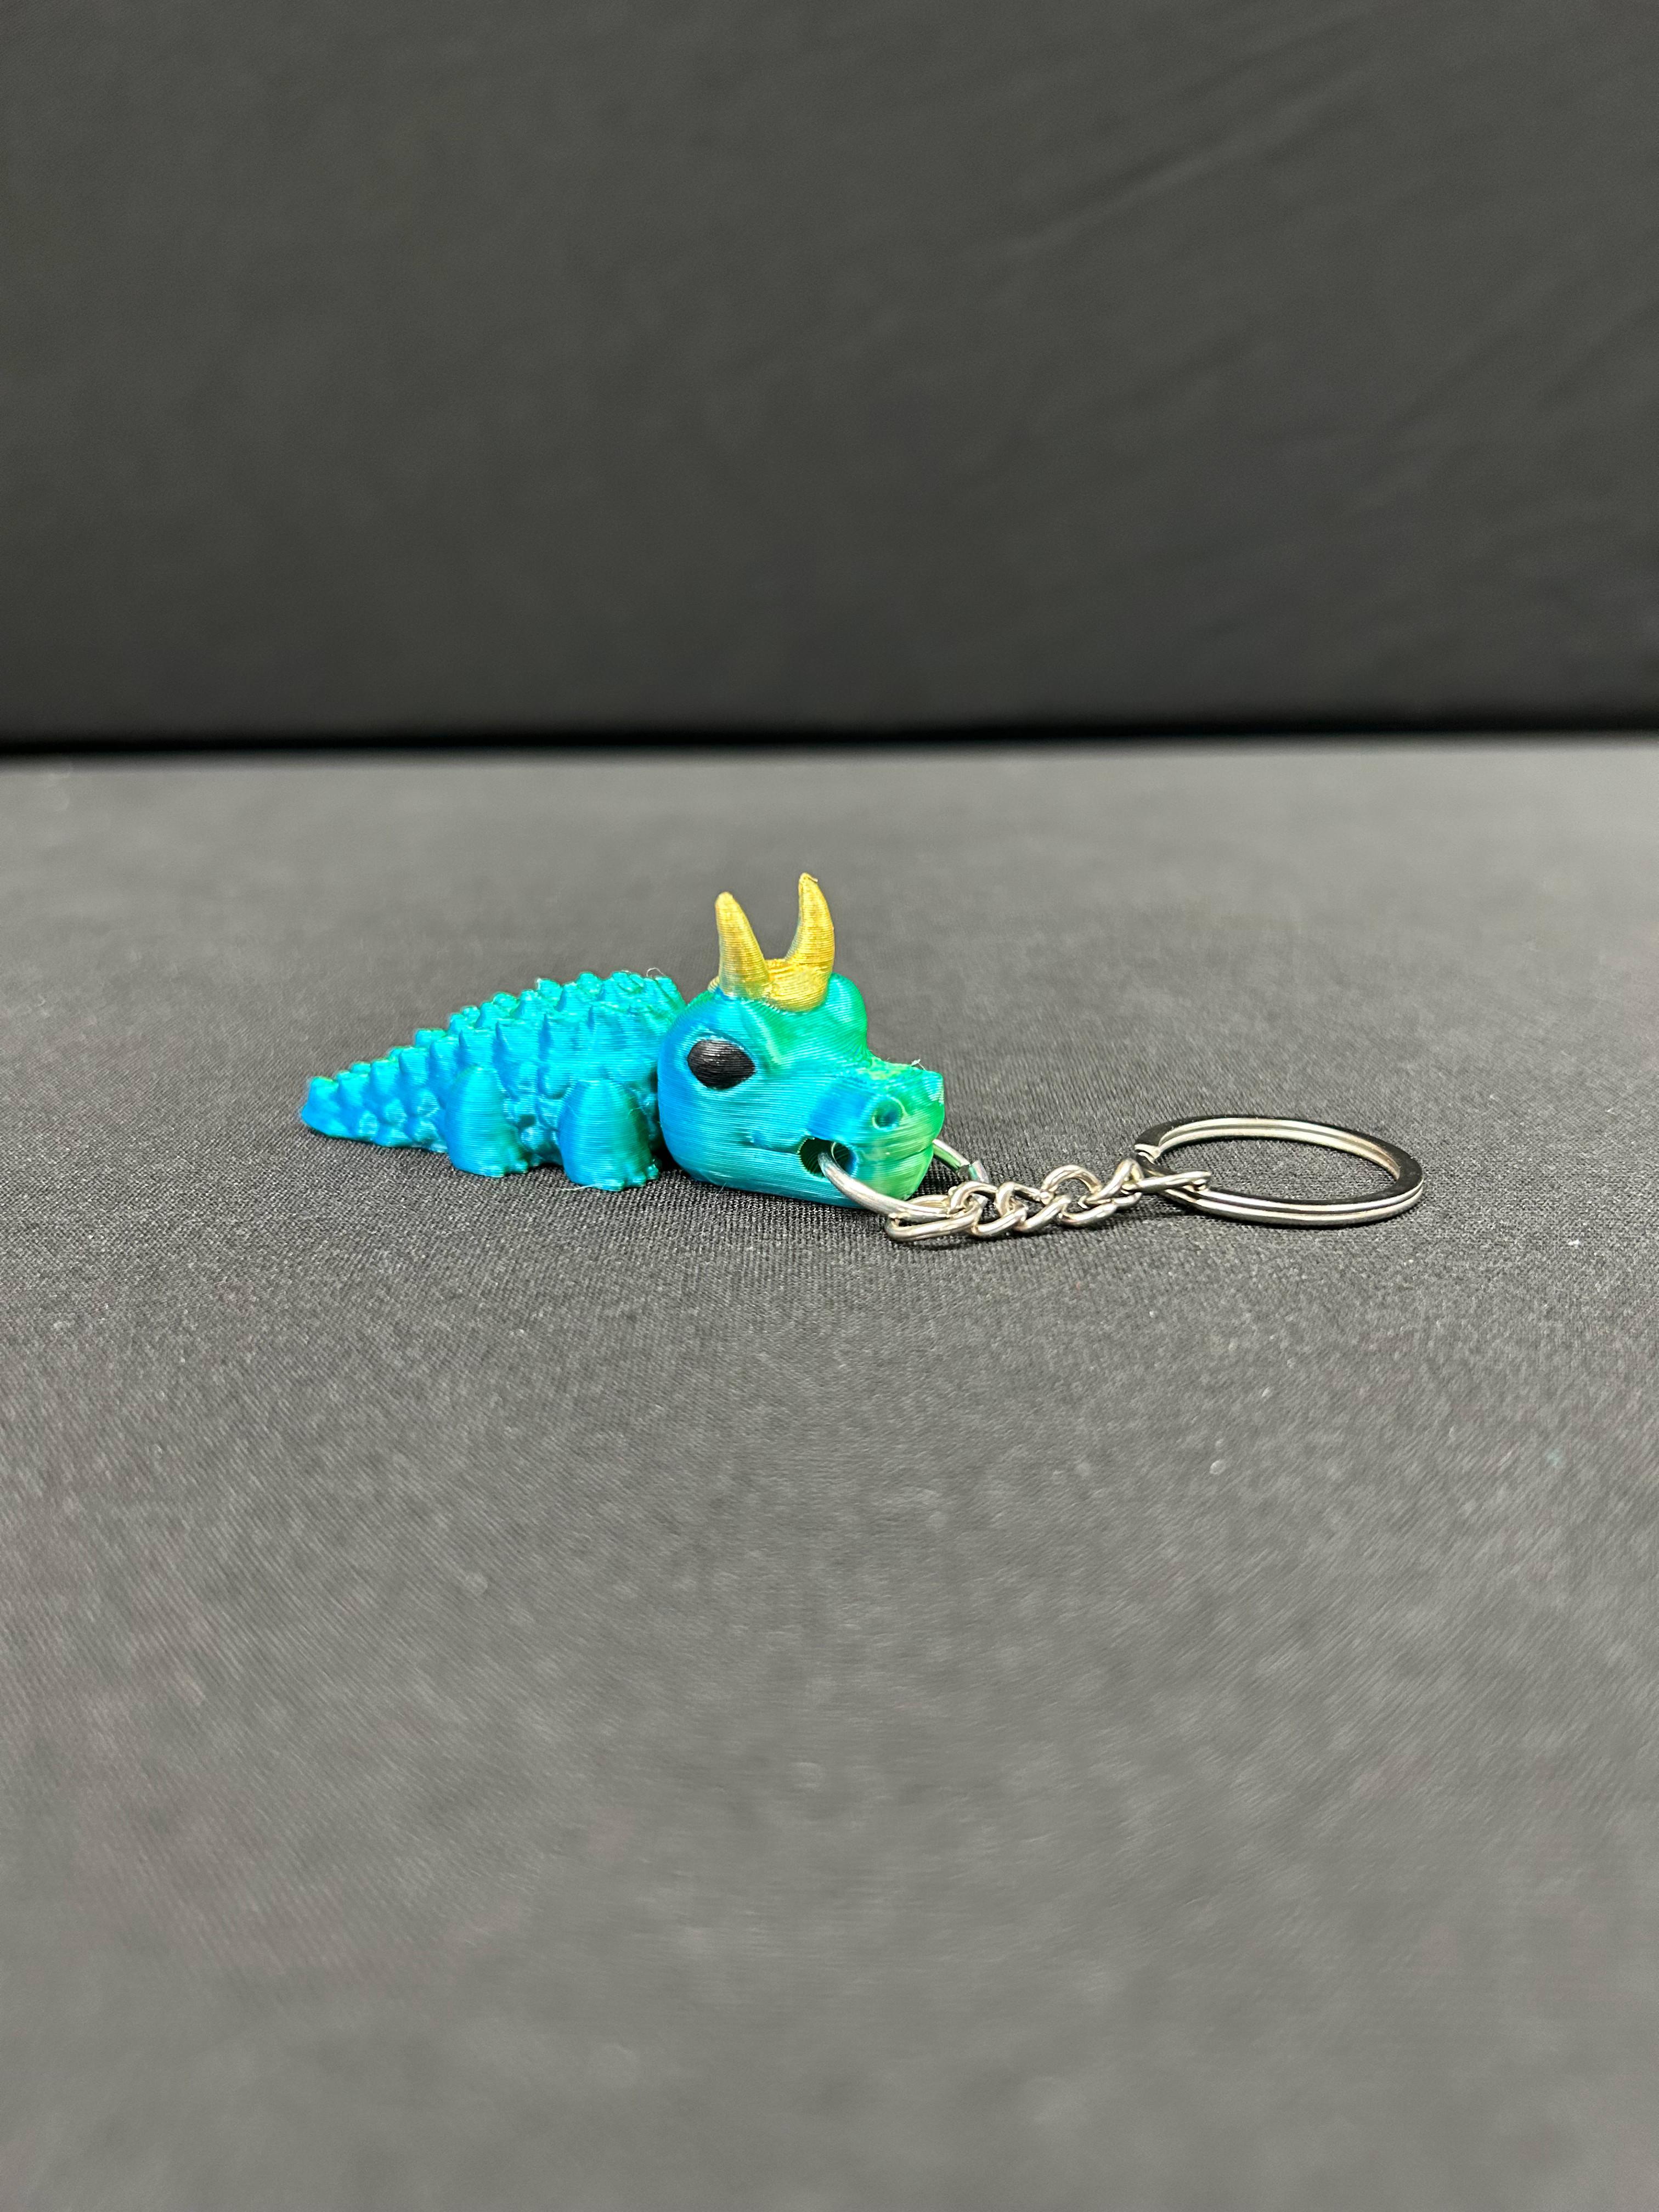 Alligator Keychain with horned crown 3d model